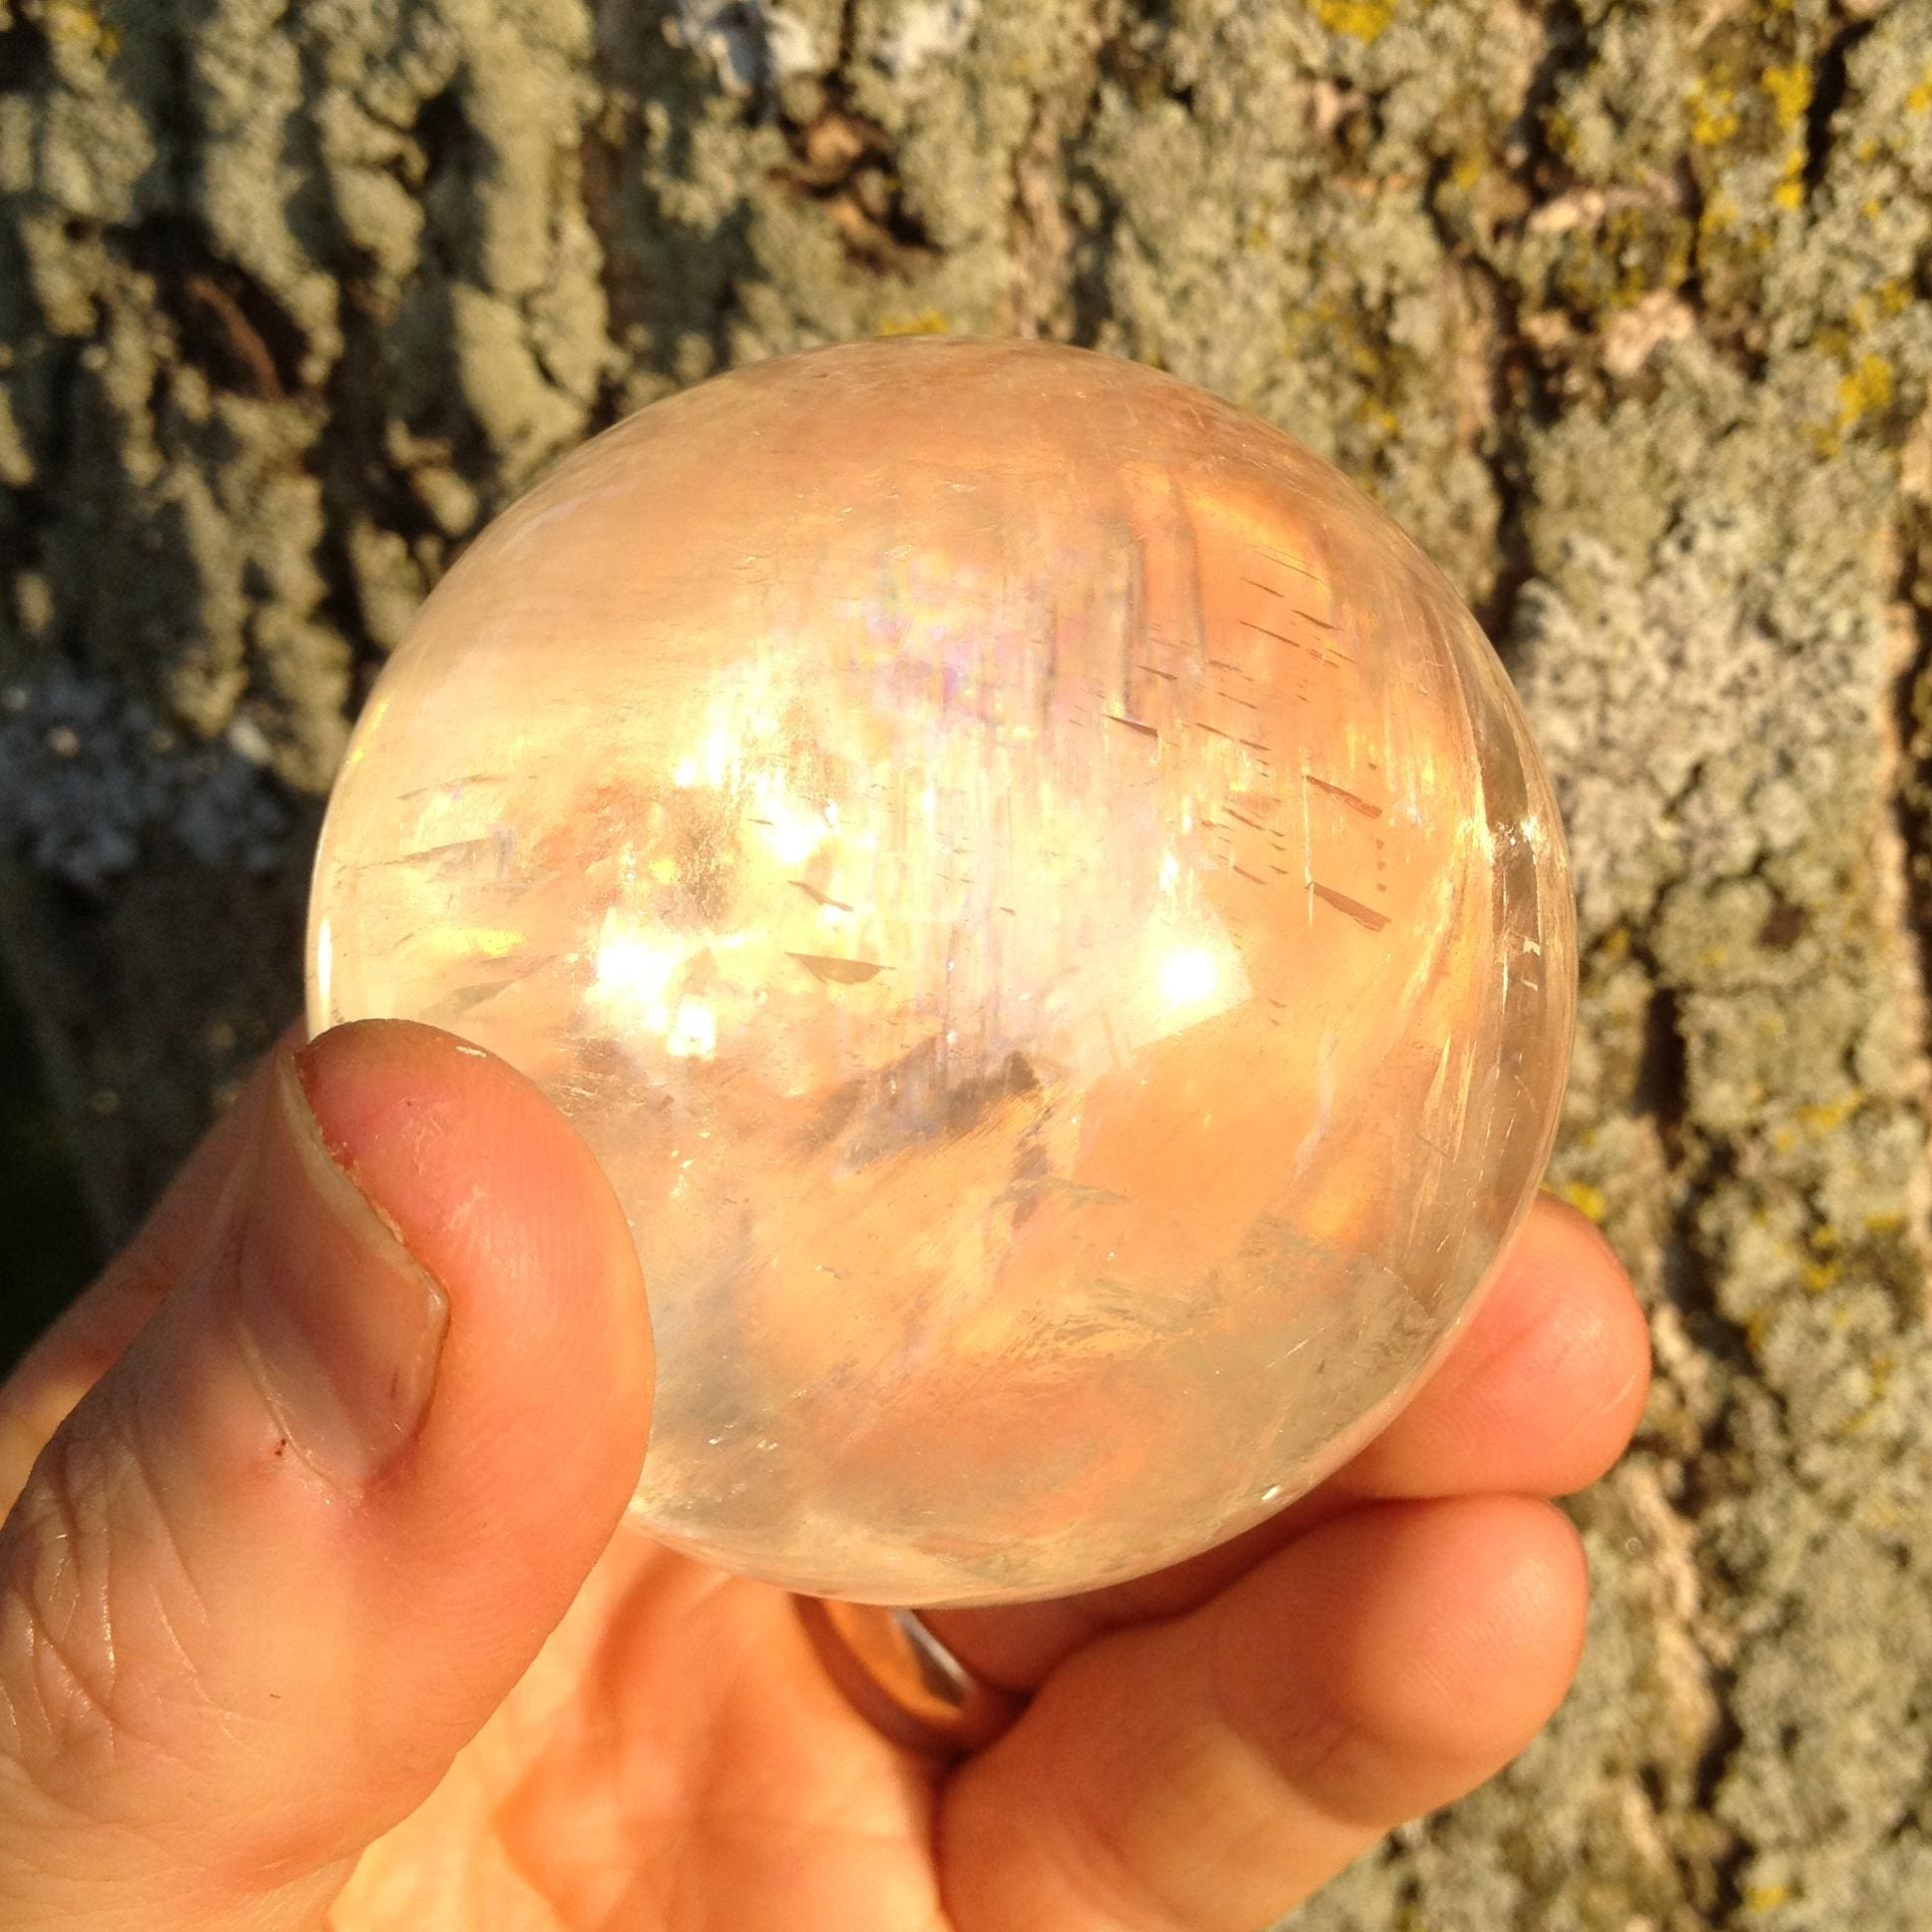 a decent sphere - like this golden rainbow Calcite sphere - should cost over $100